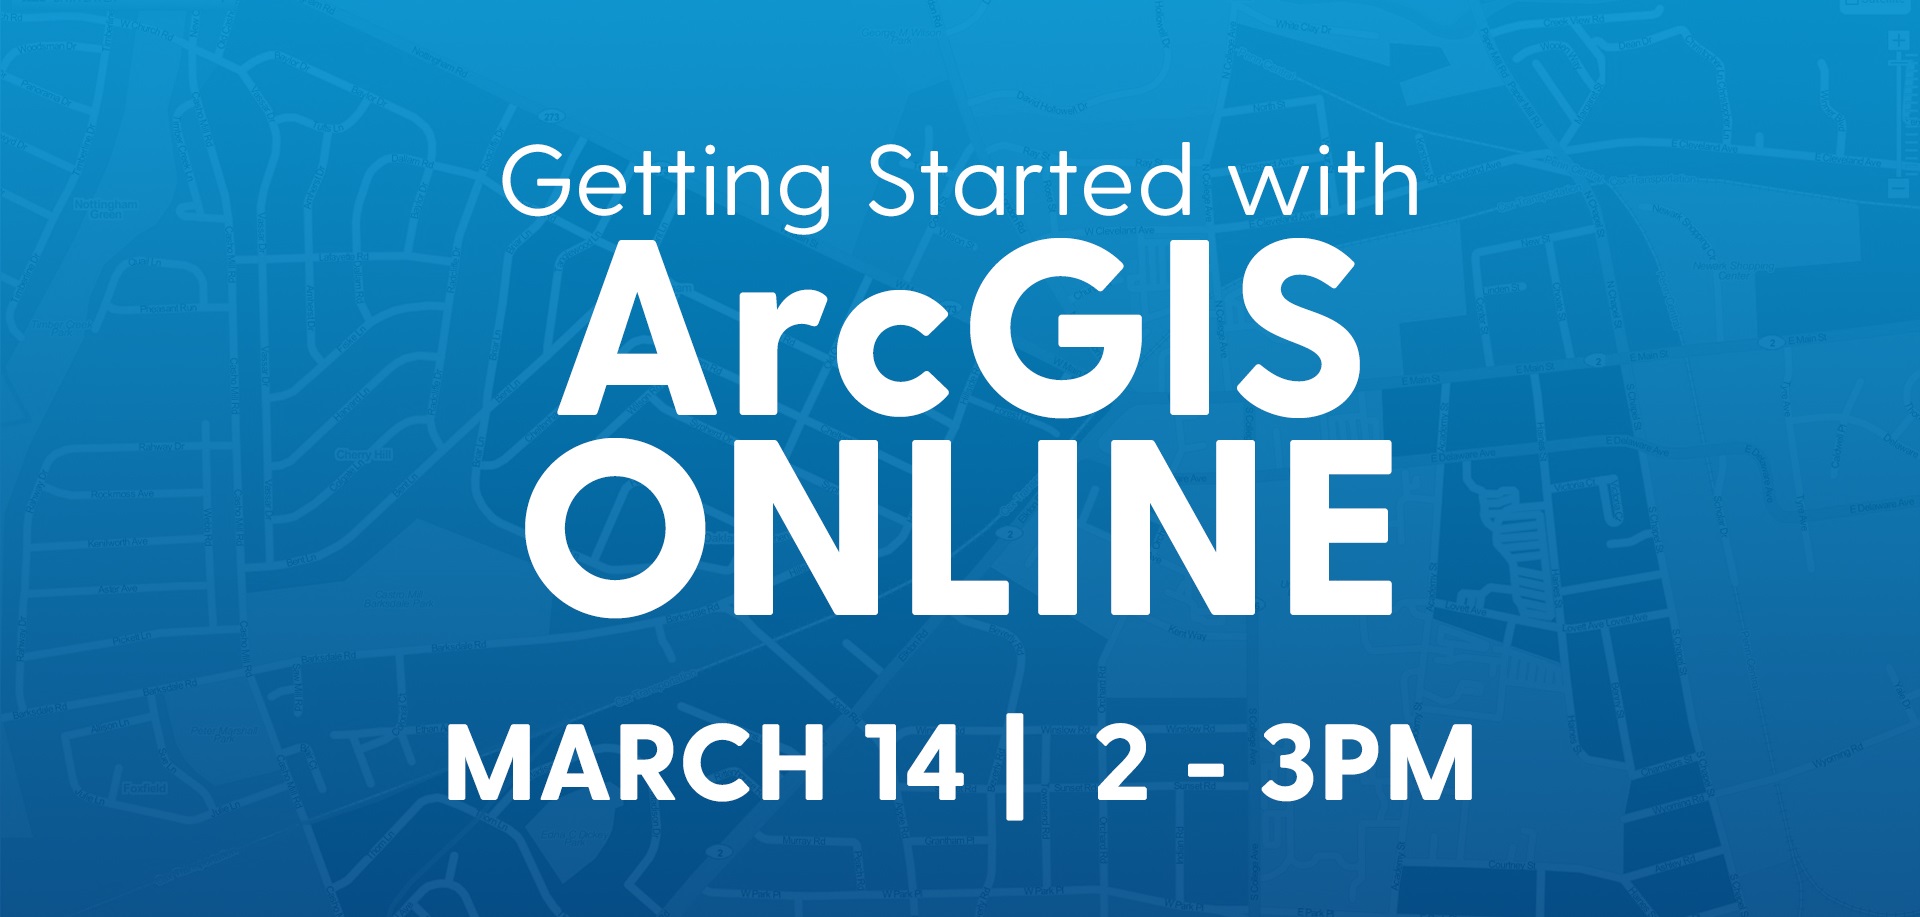 Getting Started with ArcGIS Online